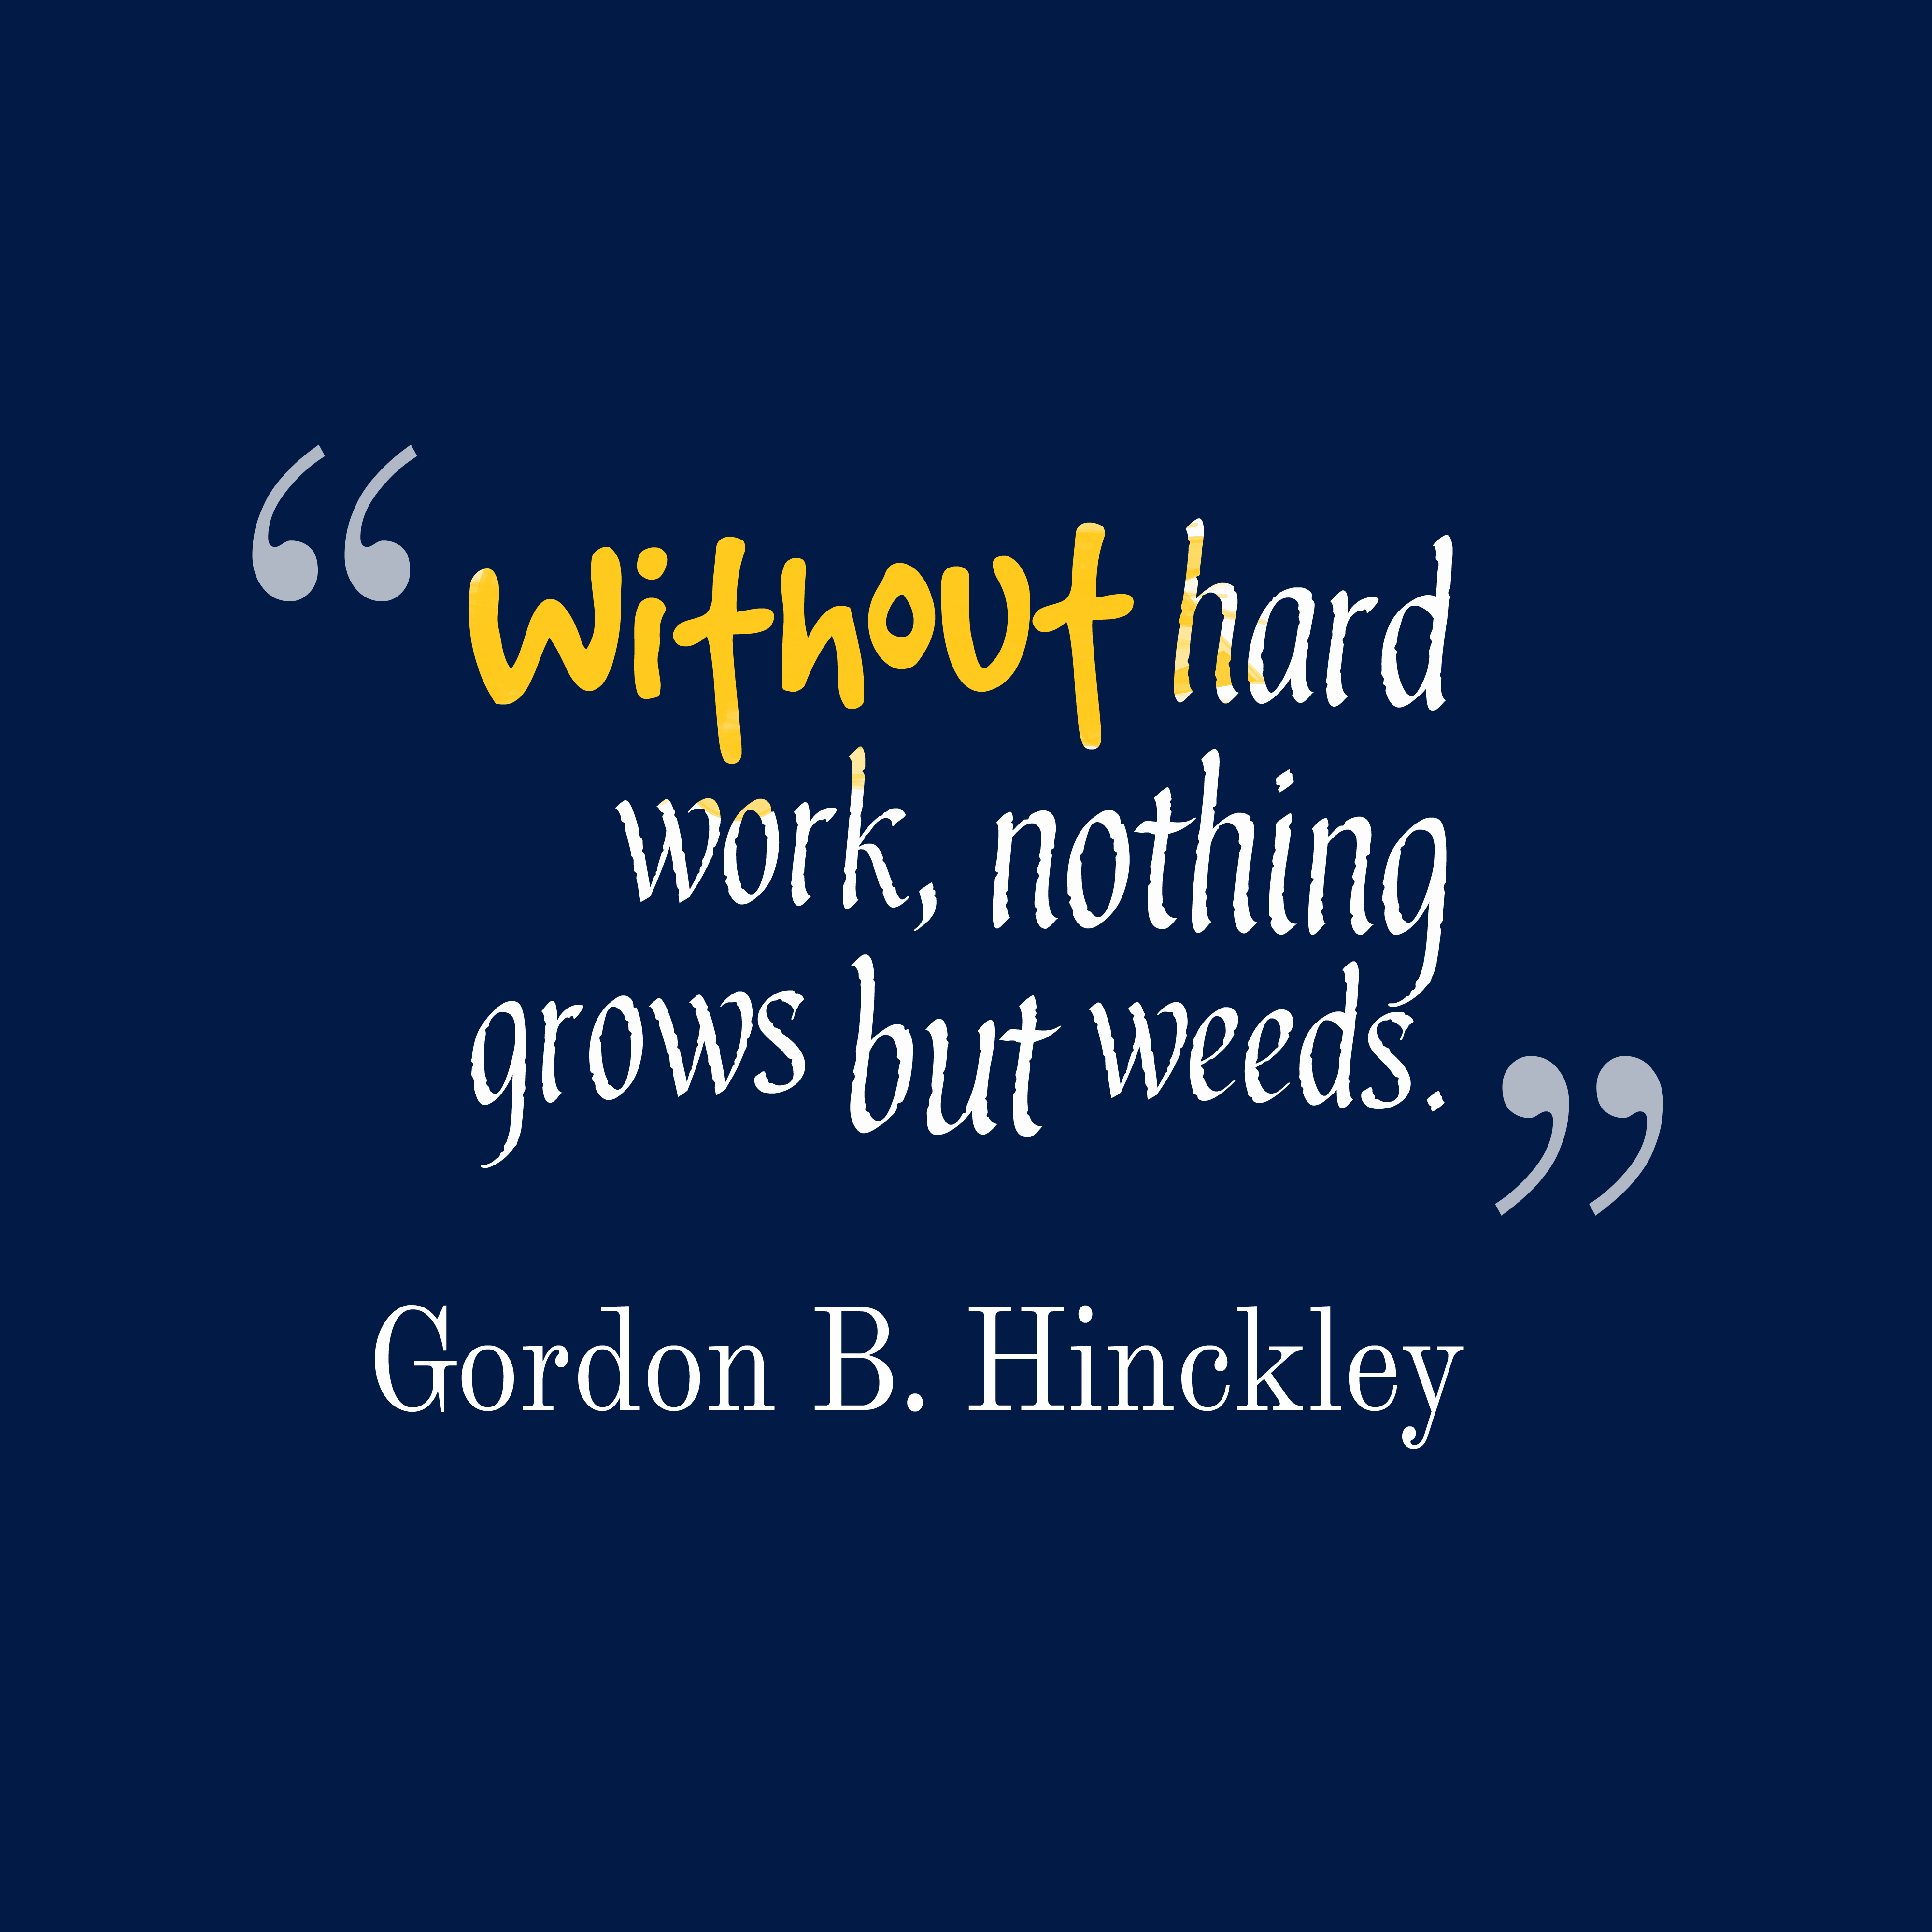 Without hard work, nothing grows but weeds. Gordon B. Hinckley